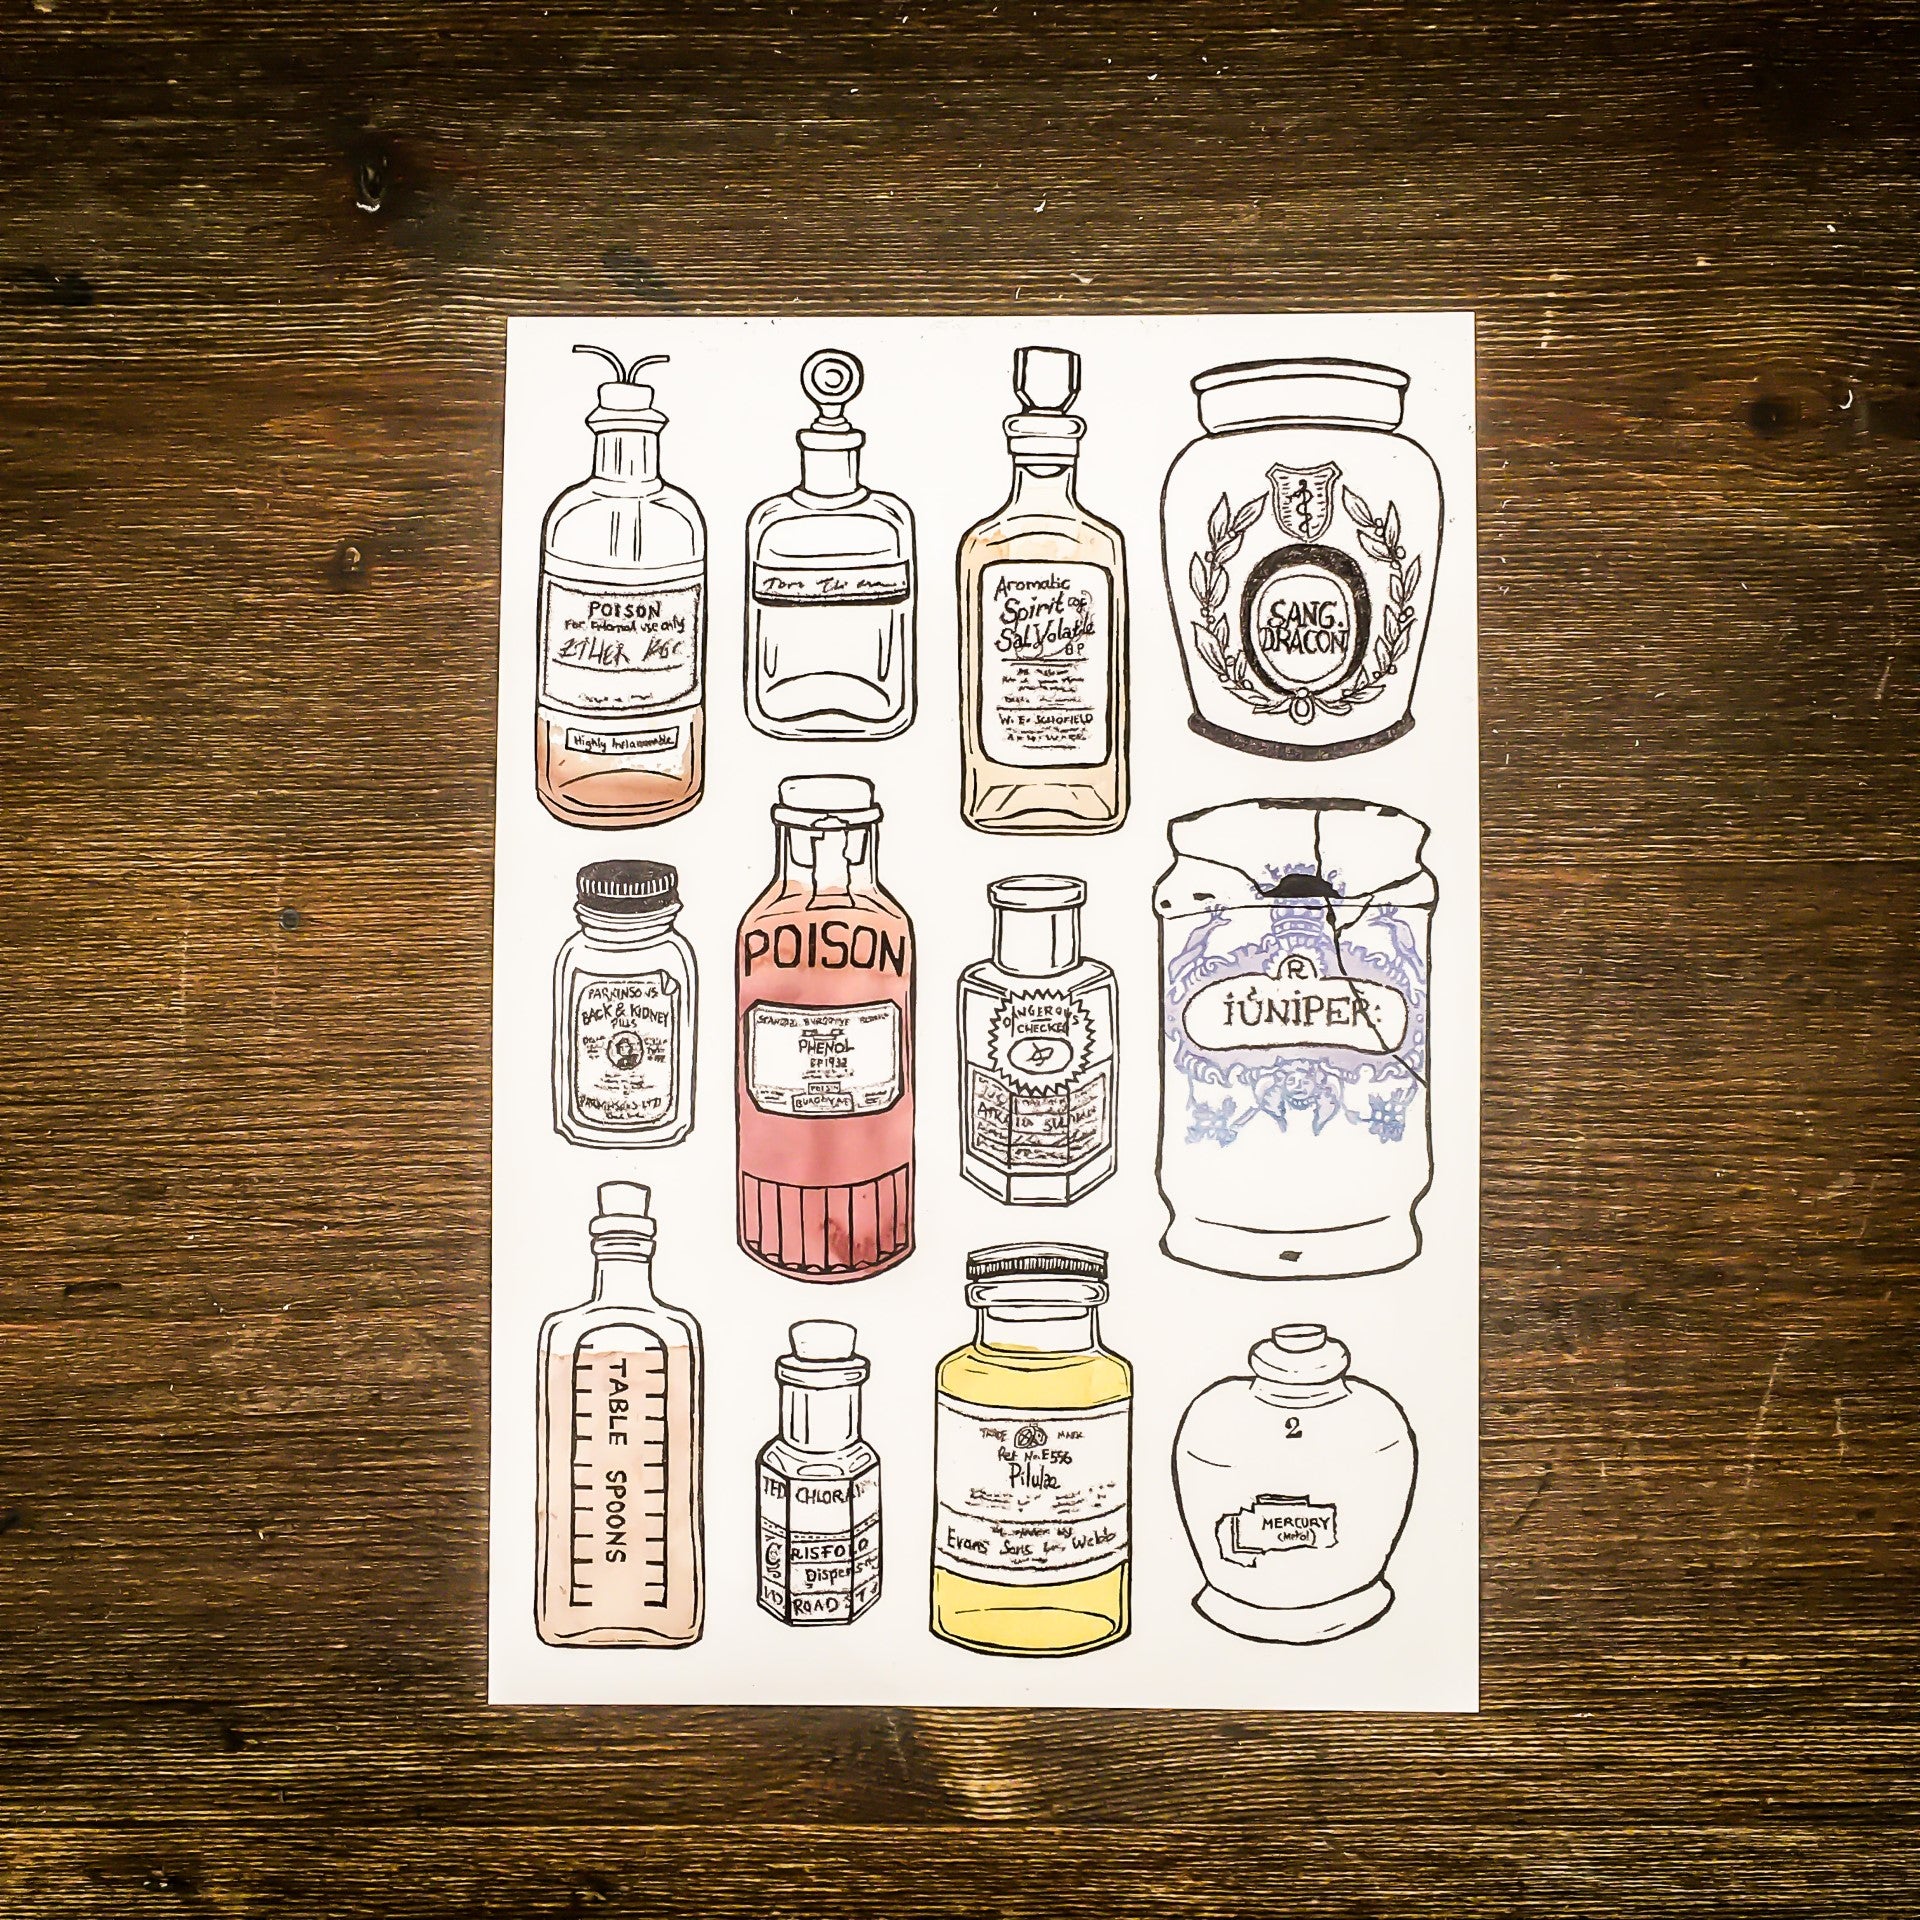 A card with the apothecary bottles design on a wooden surface